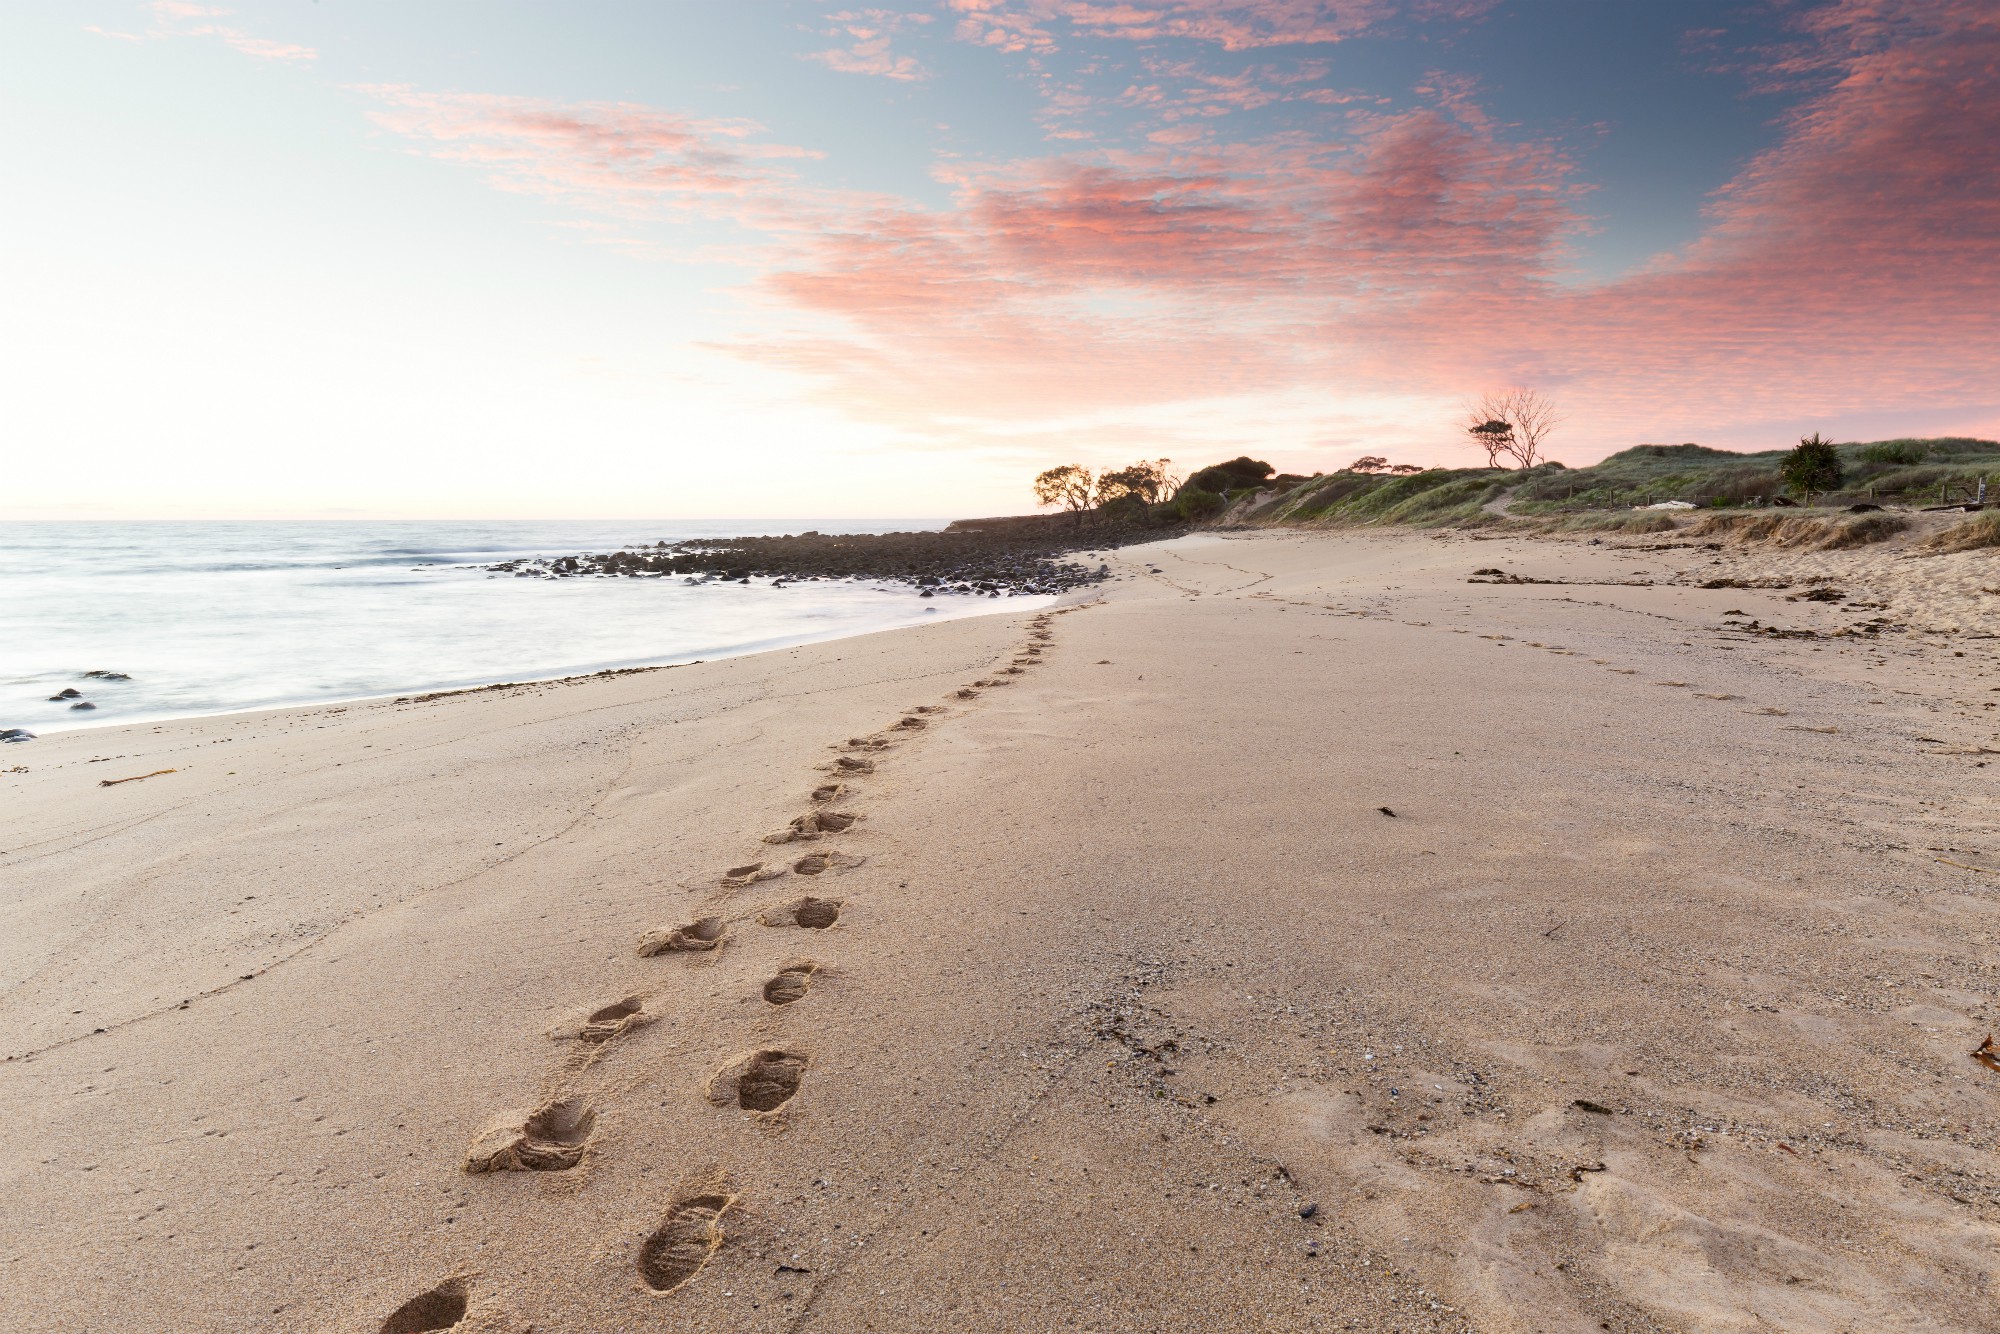 banner image of my footprints on a beach at sunset